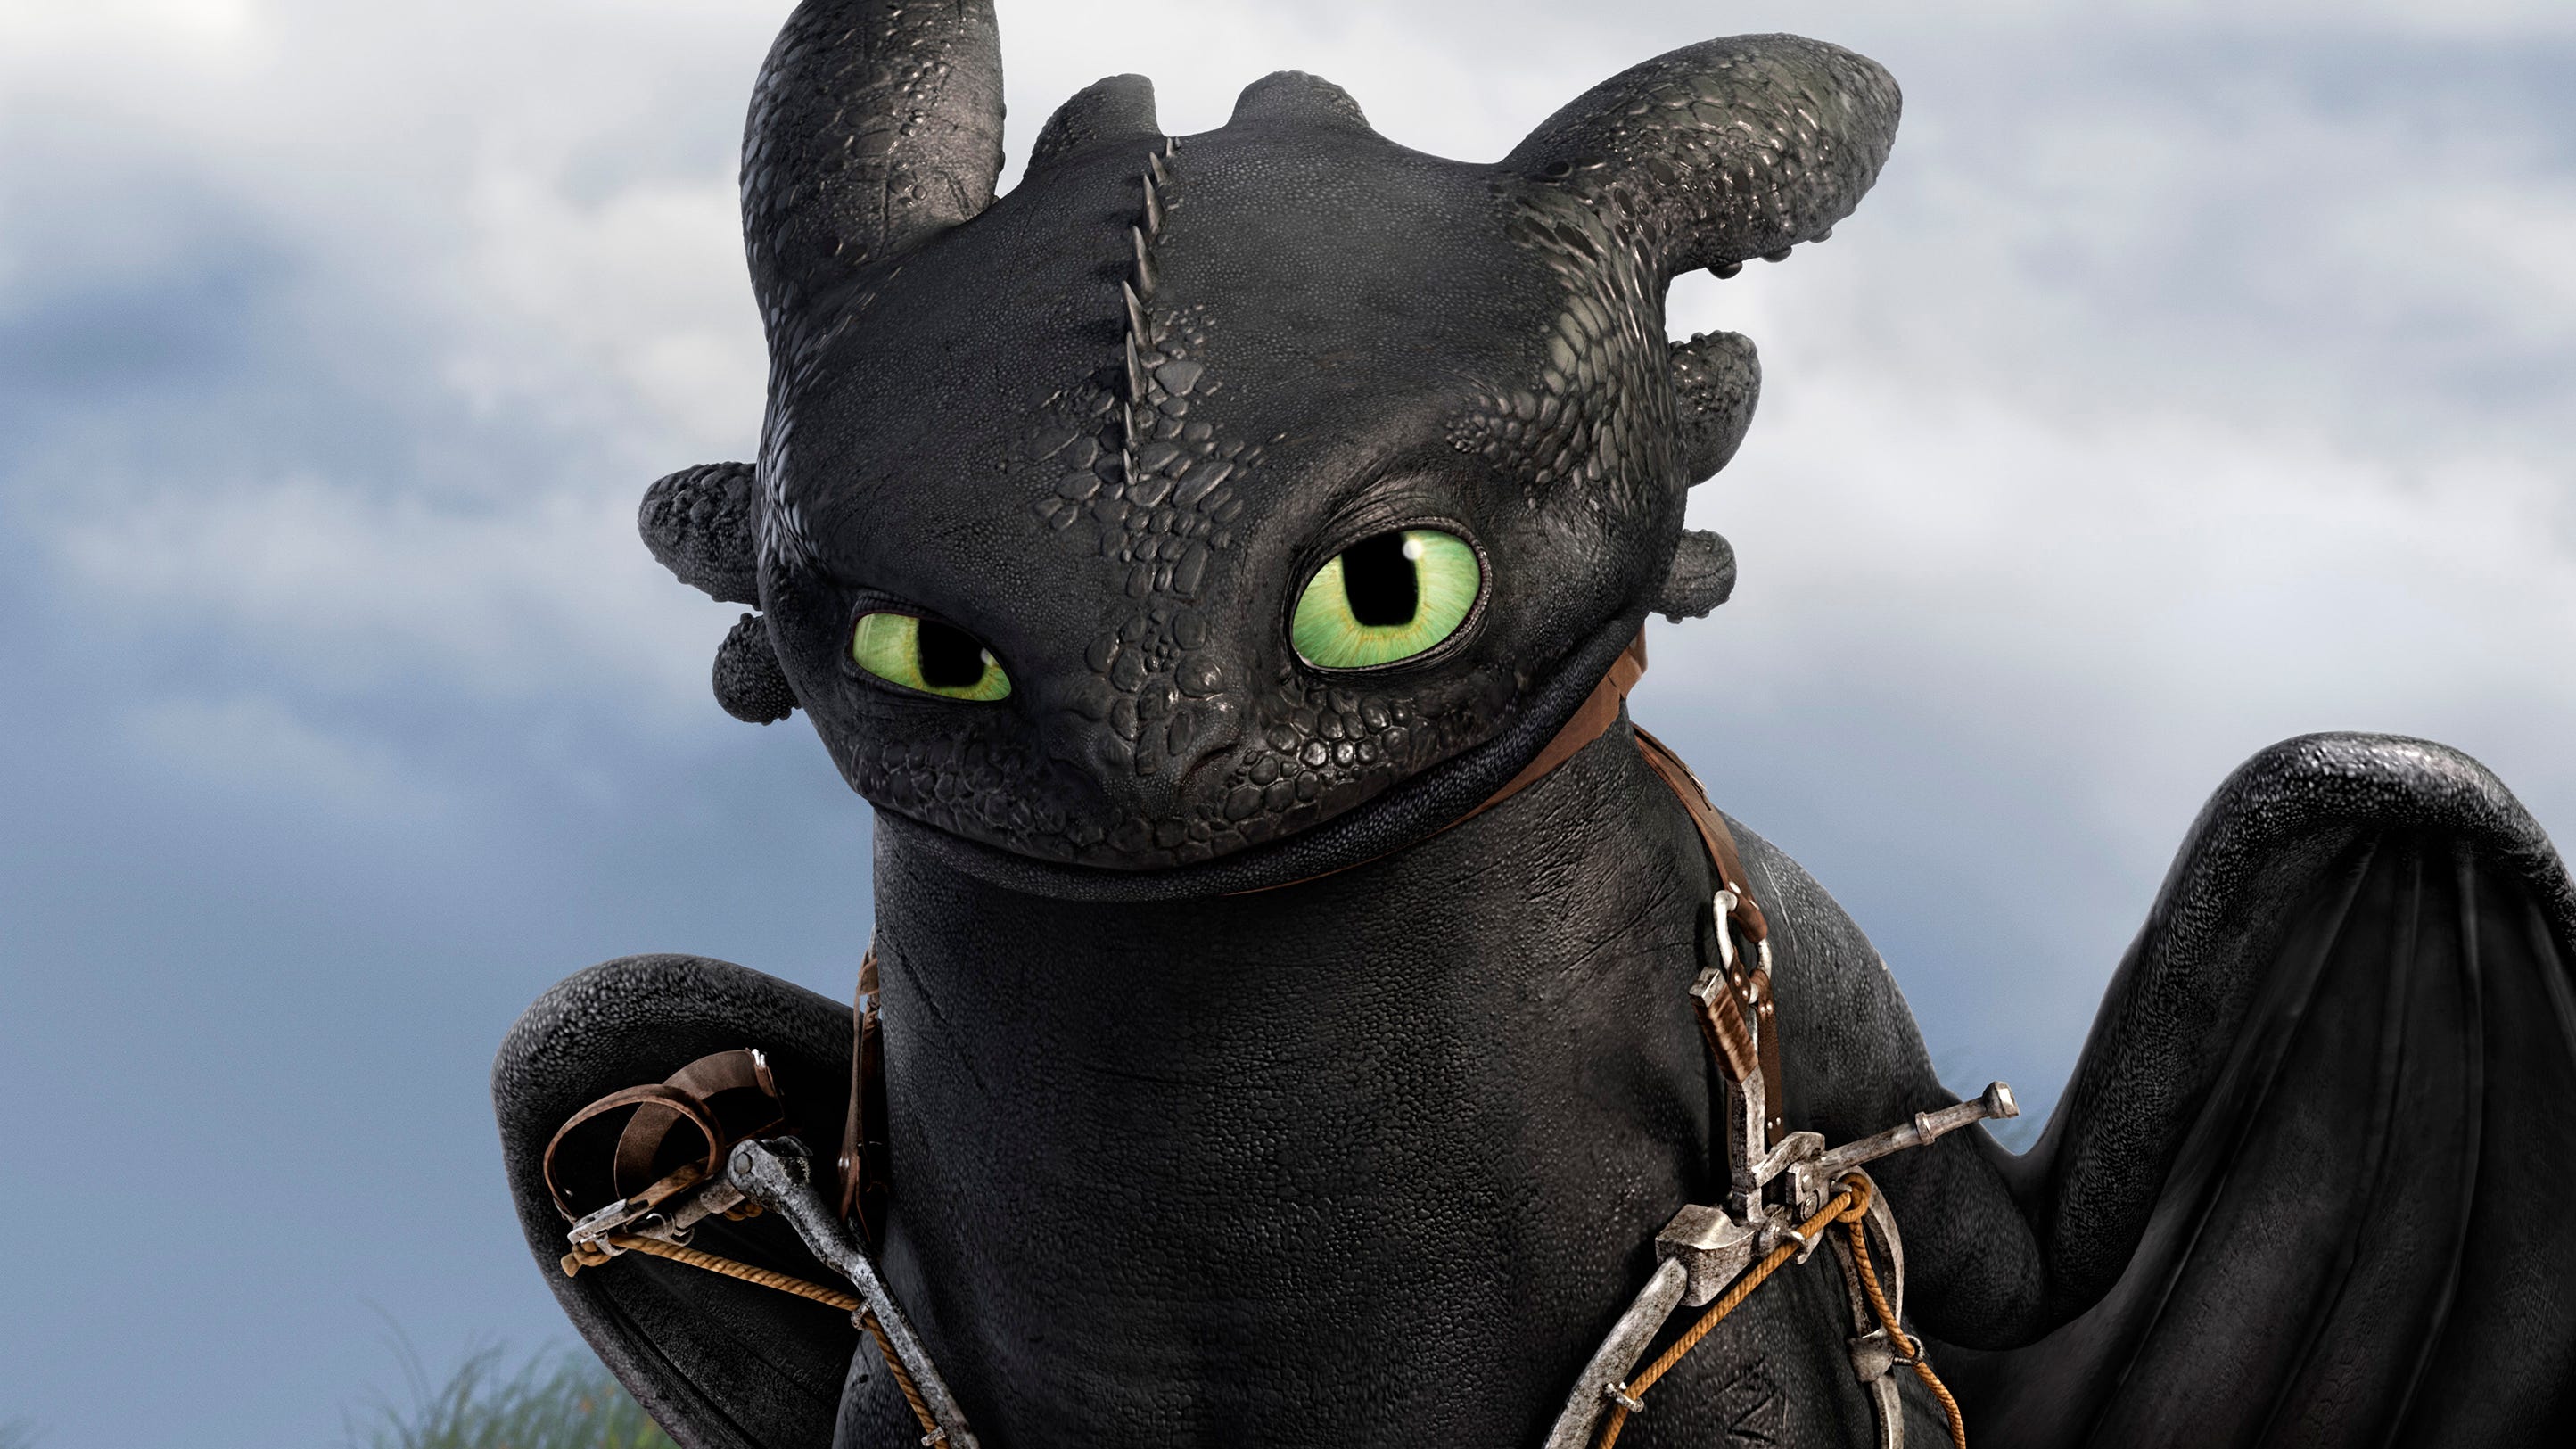 Toothless from the animated motion picture "How to Train Your Dragon 2."